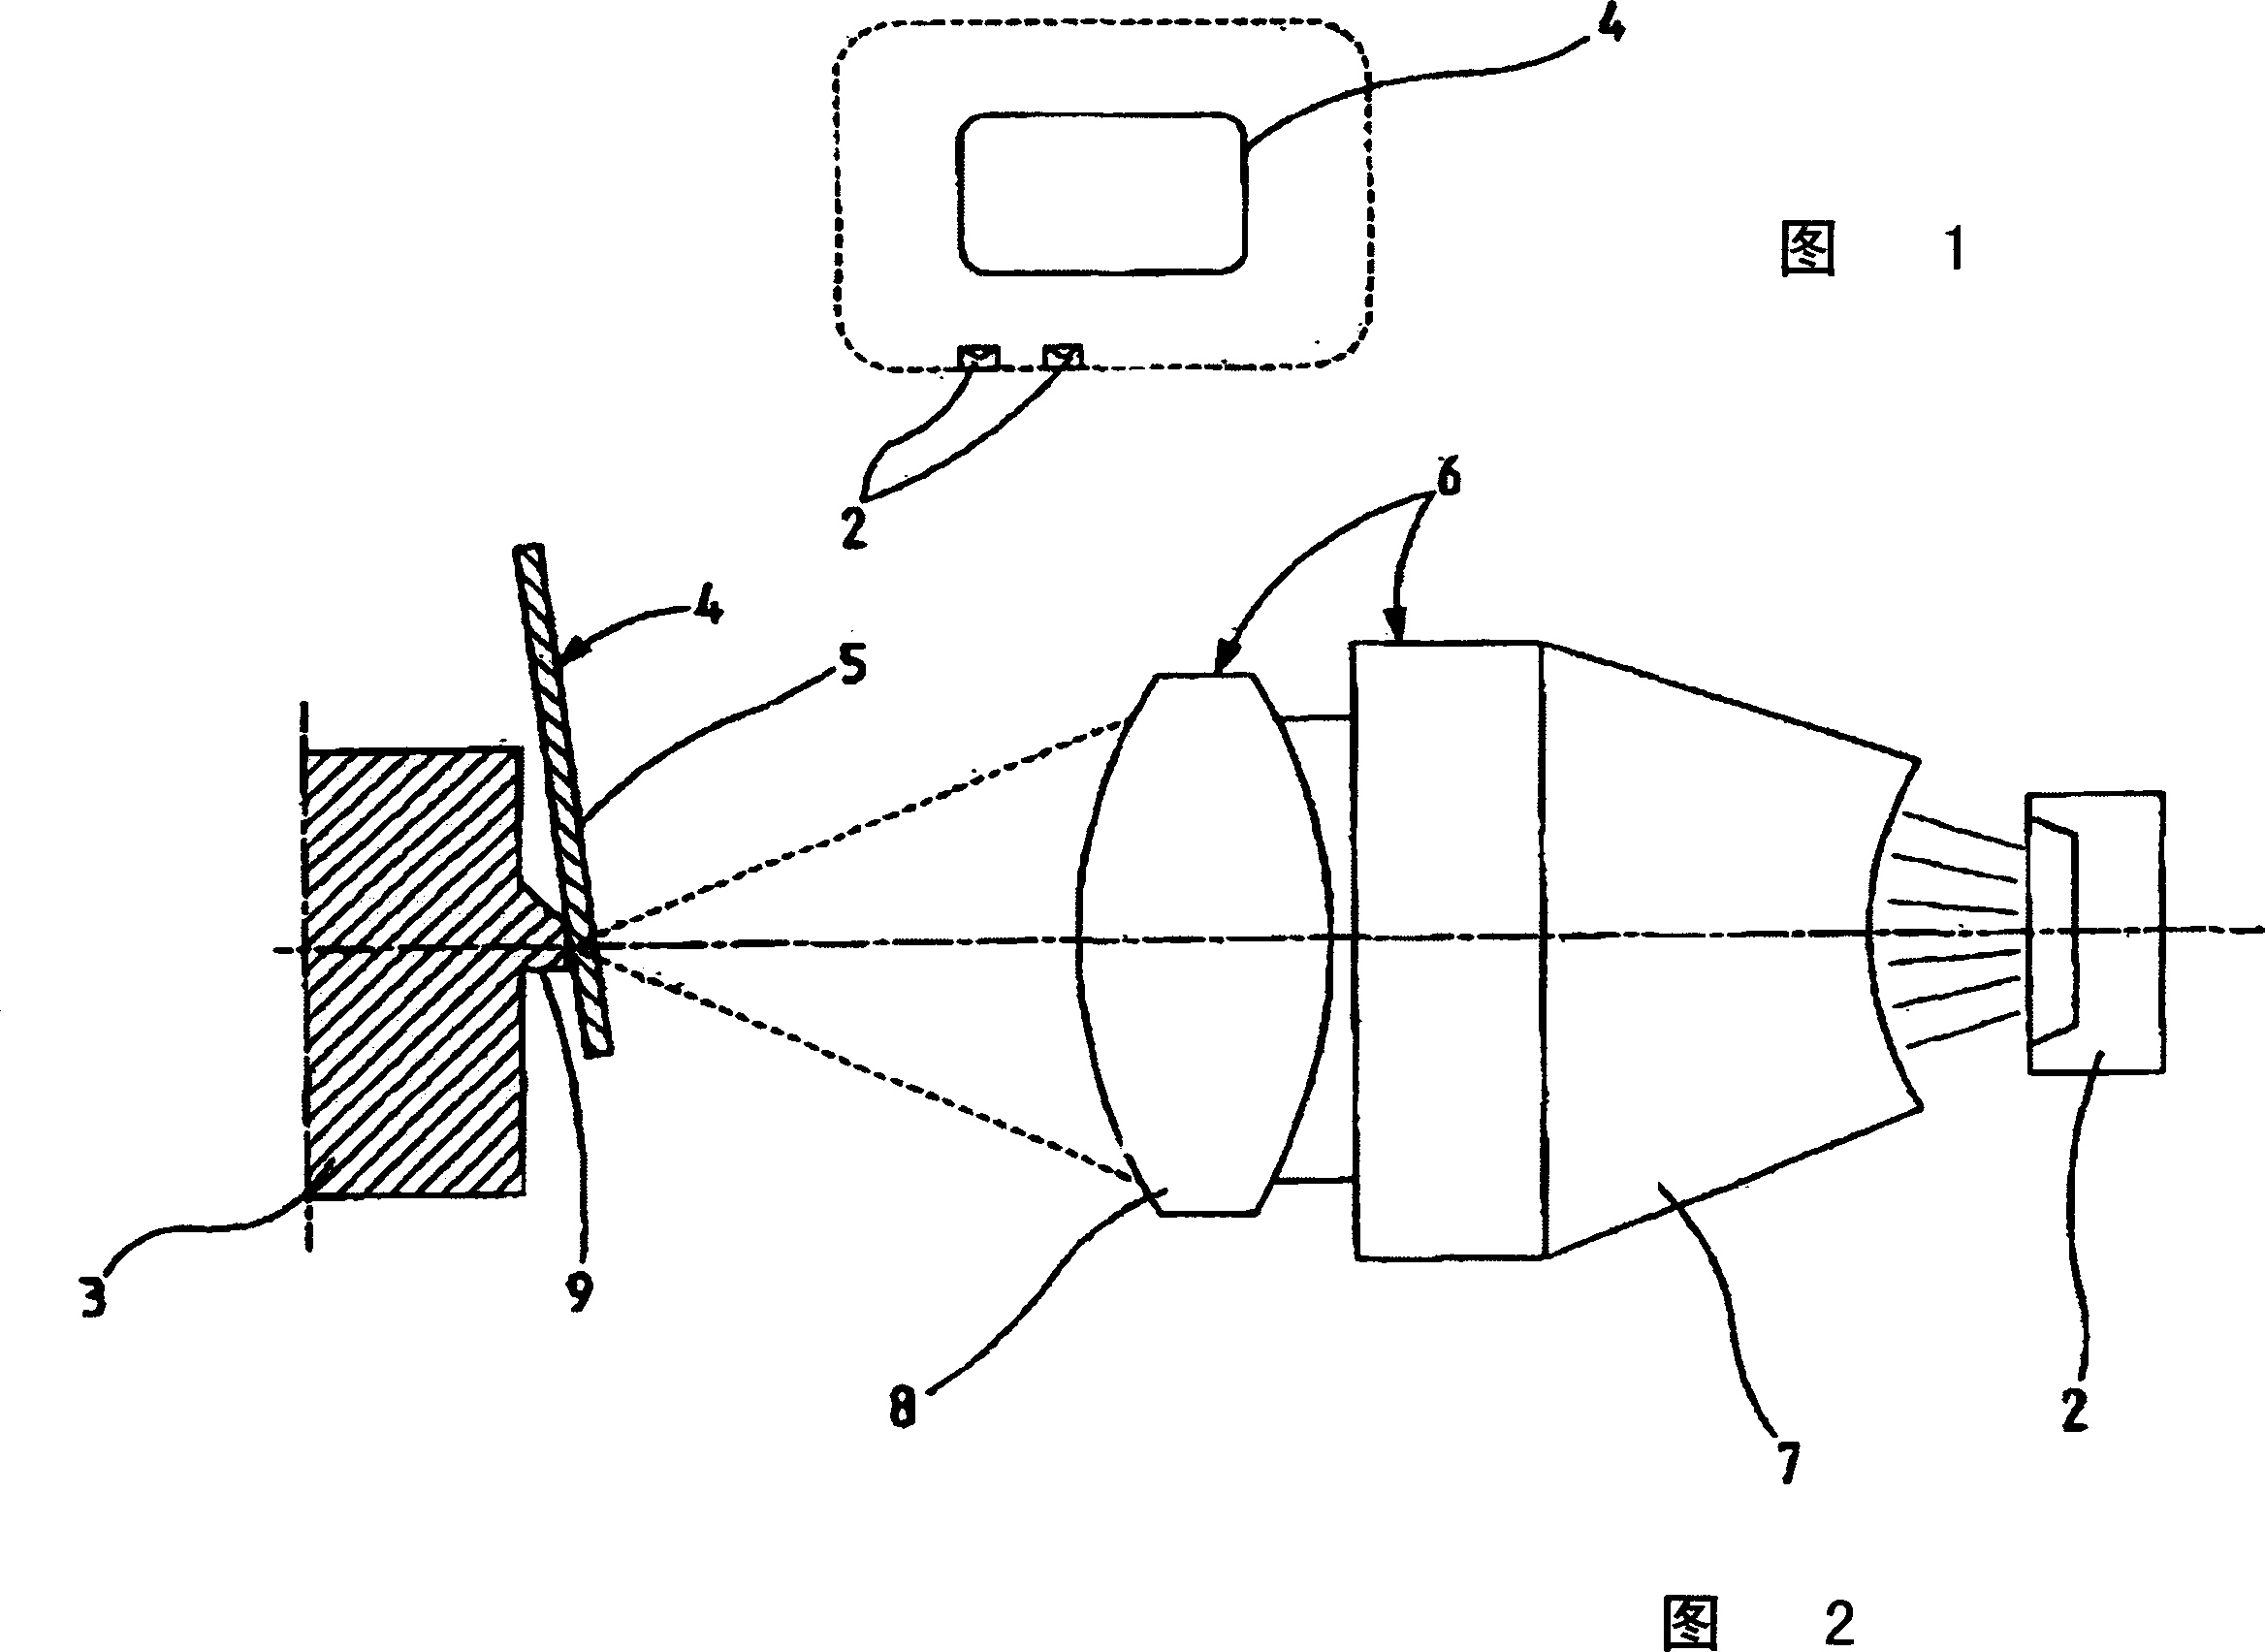 Apparatus for durable joining of two workpieces having at least one source of energy